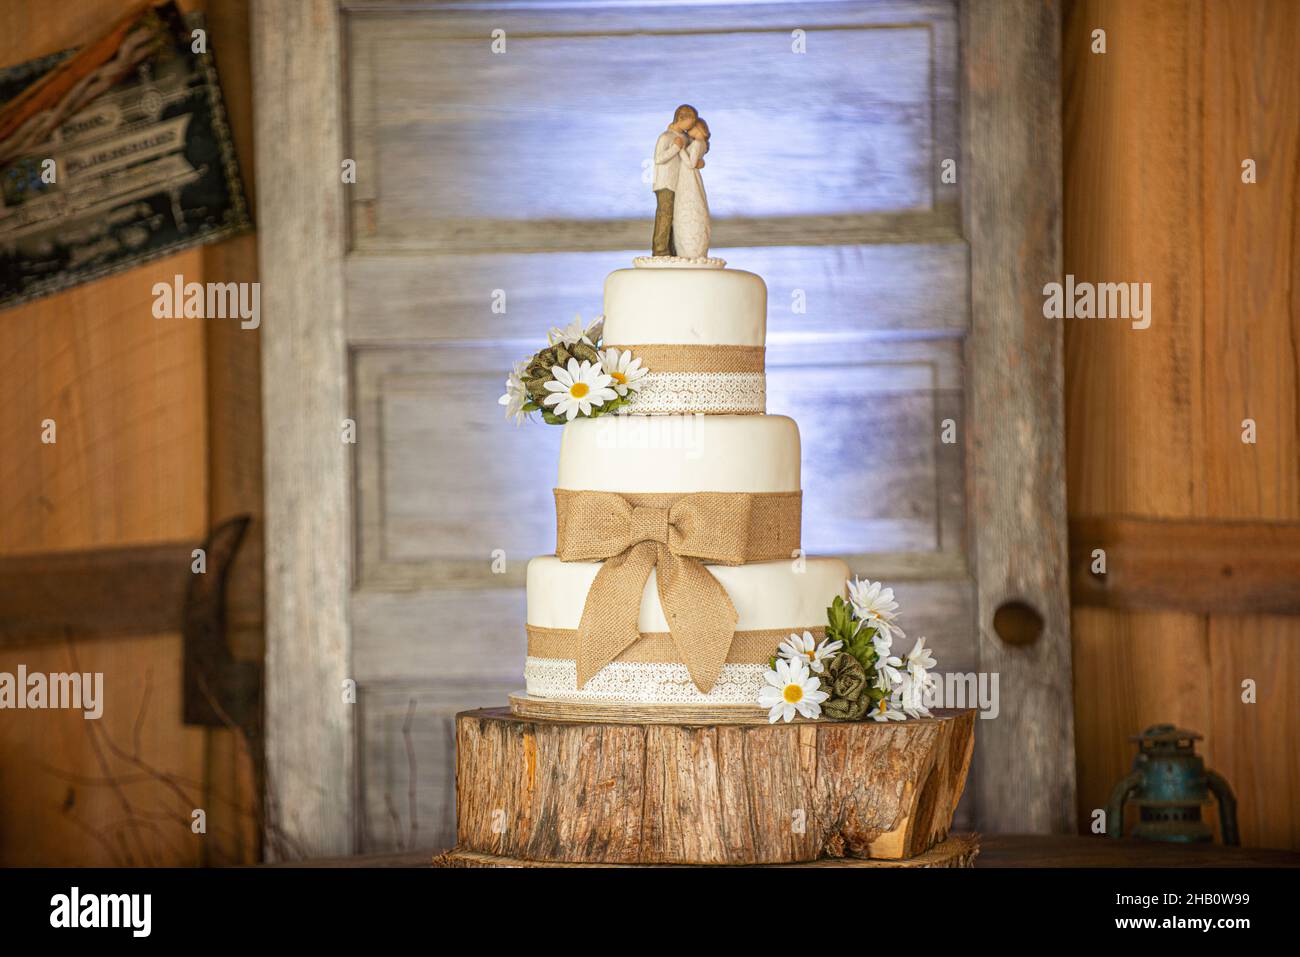 Wonderful three tier wedding cake with canvass lace and bows and sunflowers on wood bark stand and wood door background Stock Photo